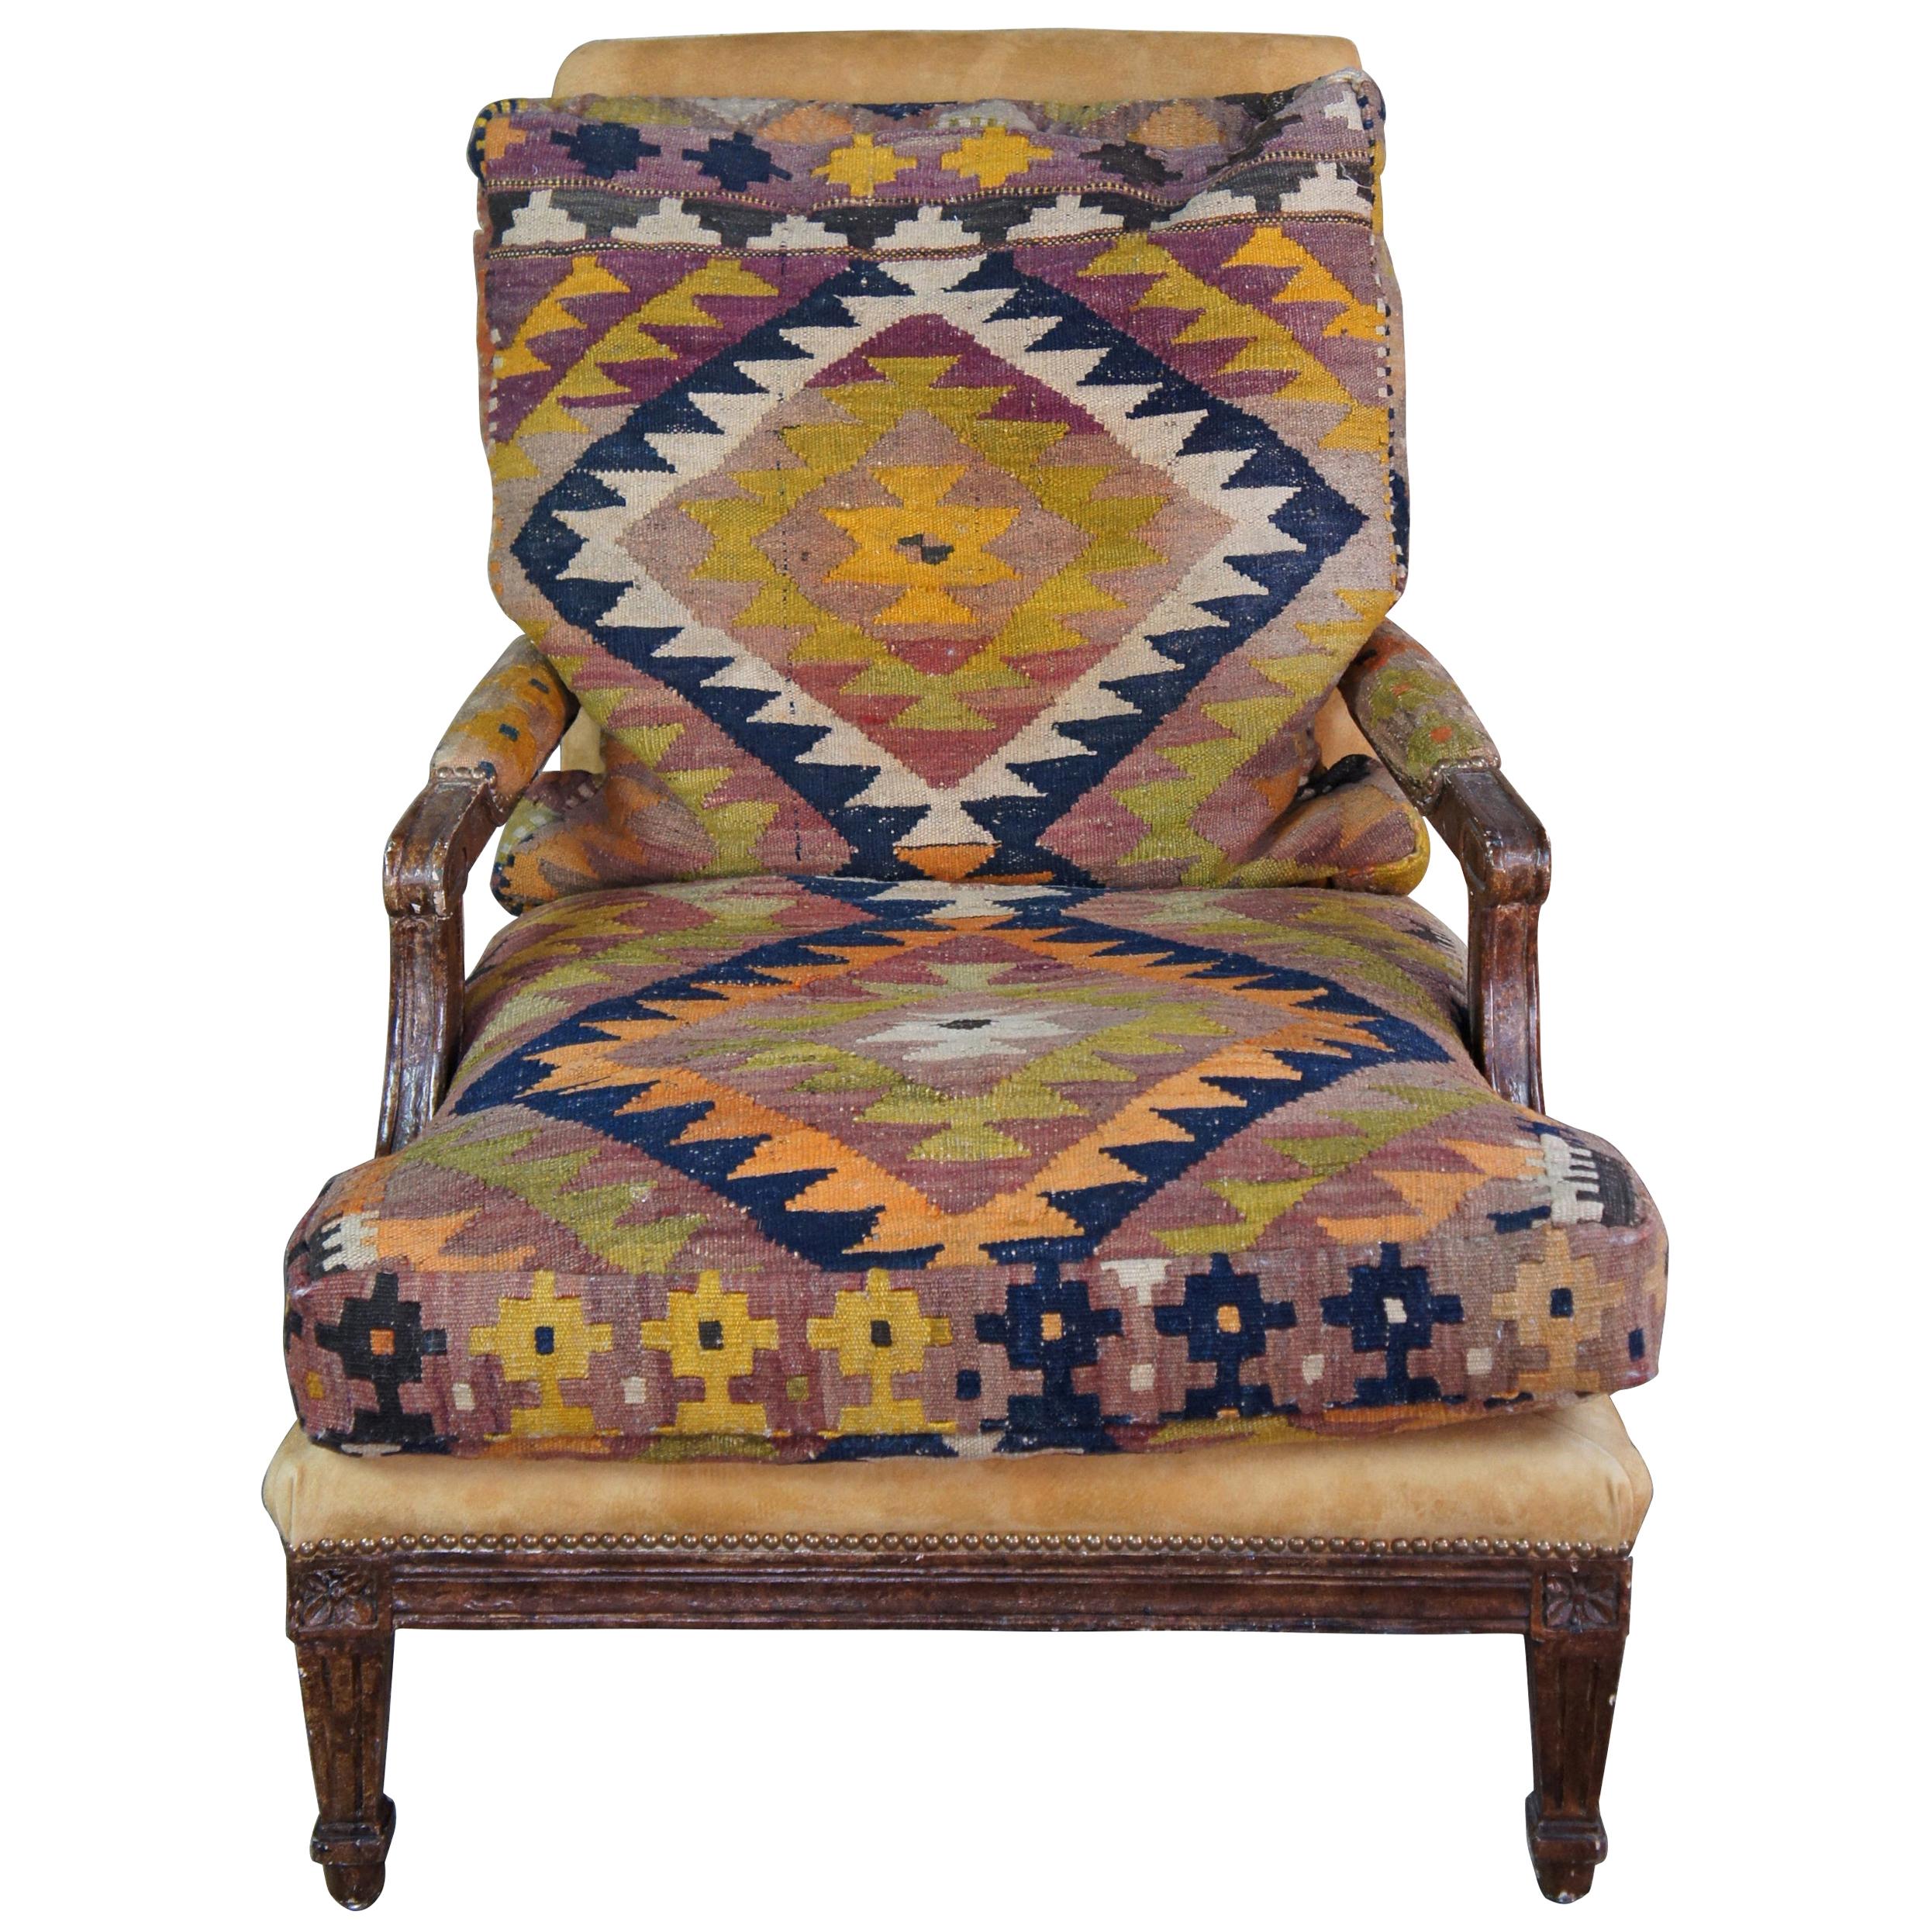 Oversize Southwestern Marquis Armchair Fauteuil Louis XV Style Lounge Rug Kilim